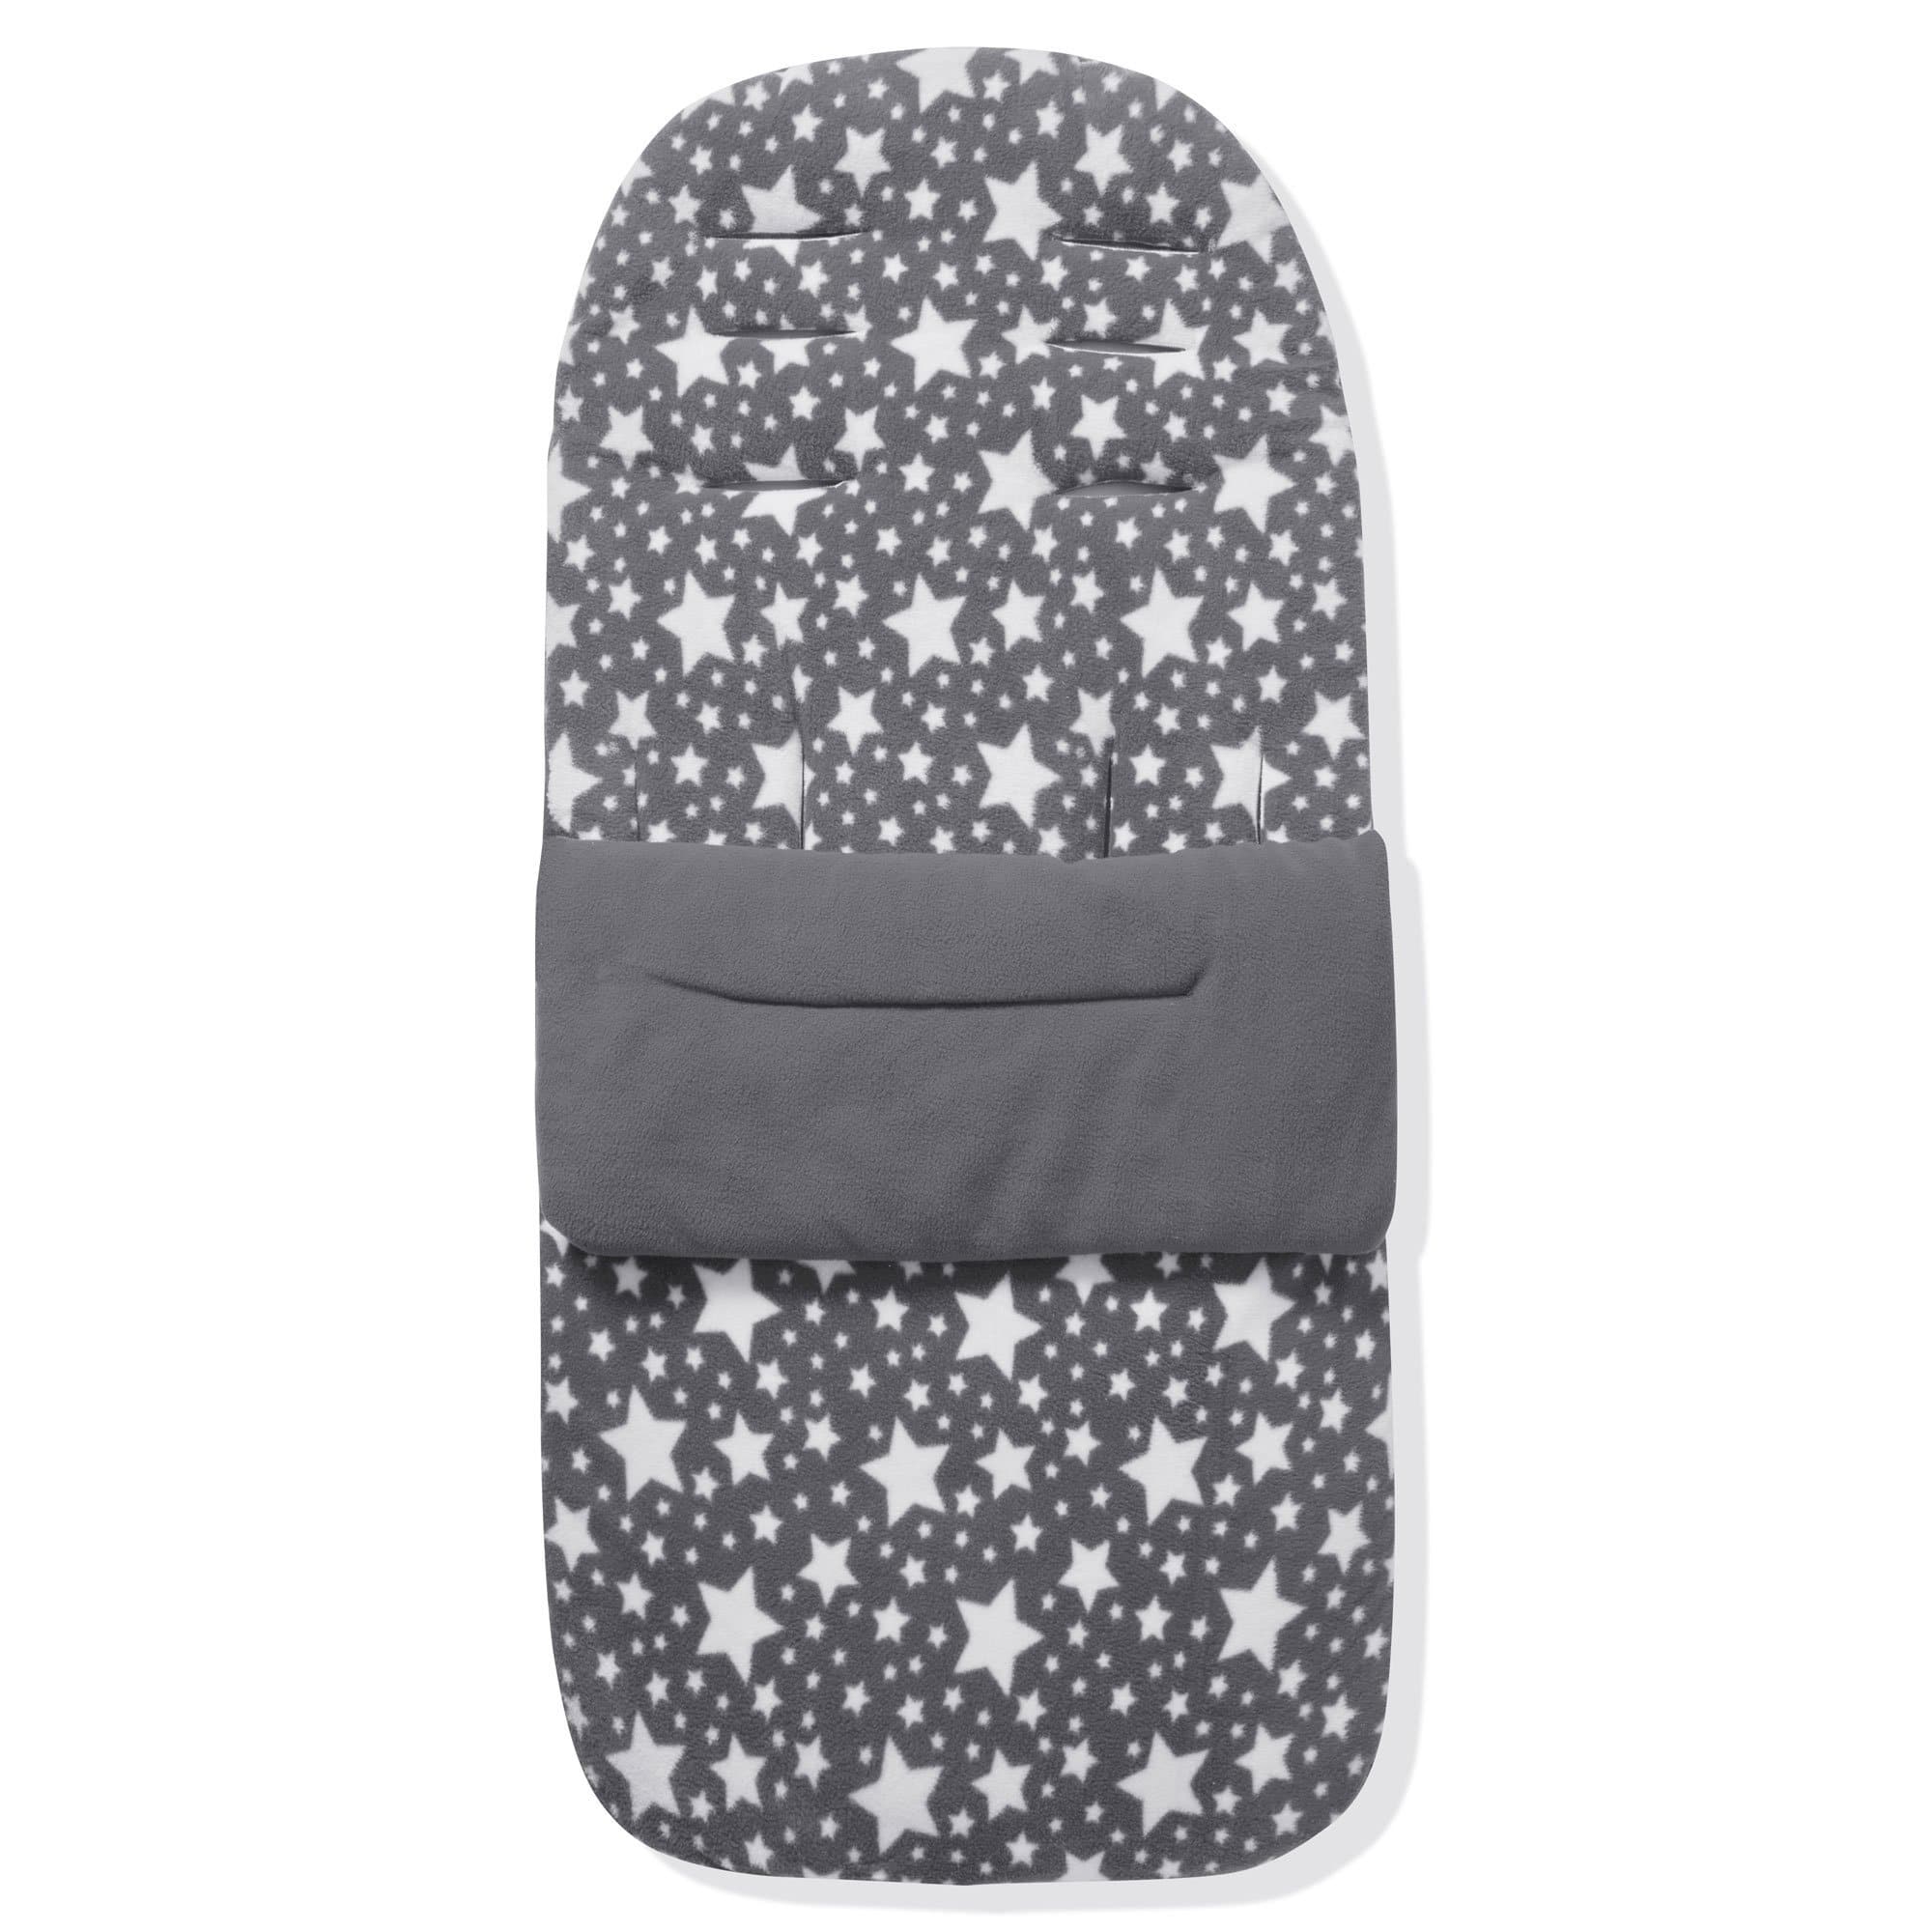 Fleece Footmuff / Cosy Toes Compatible With Combi - Grey Star / Fits All Models | For Your Little One